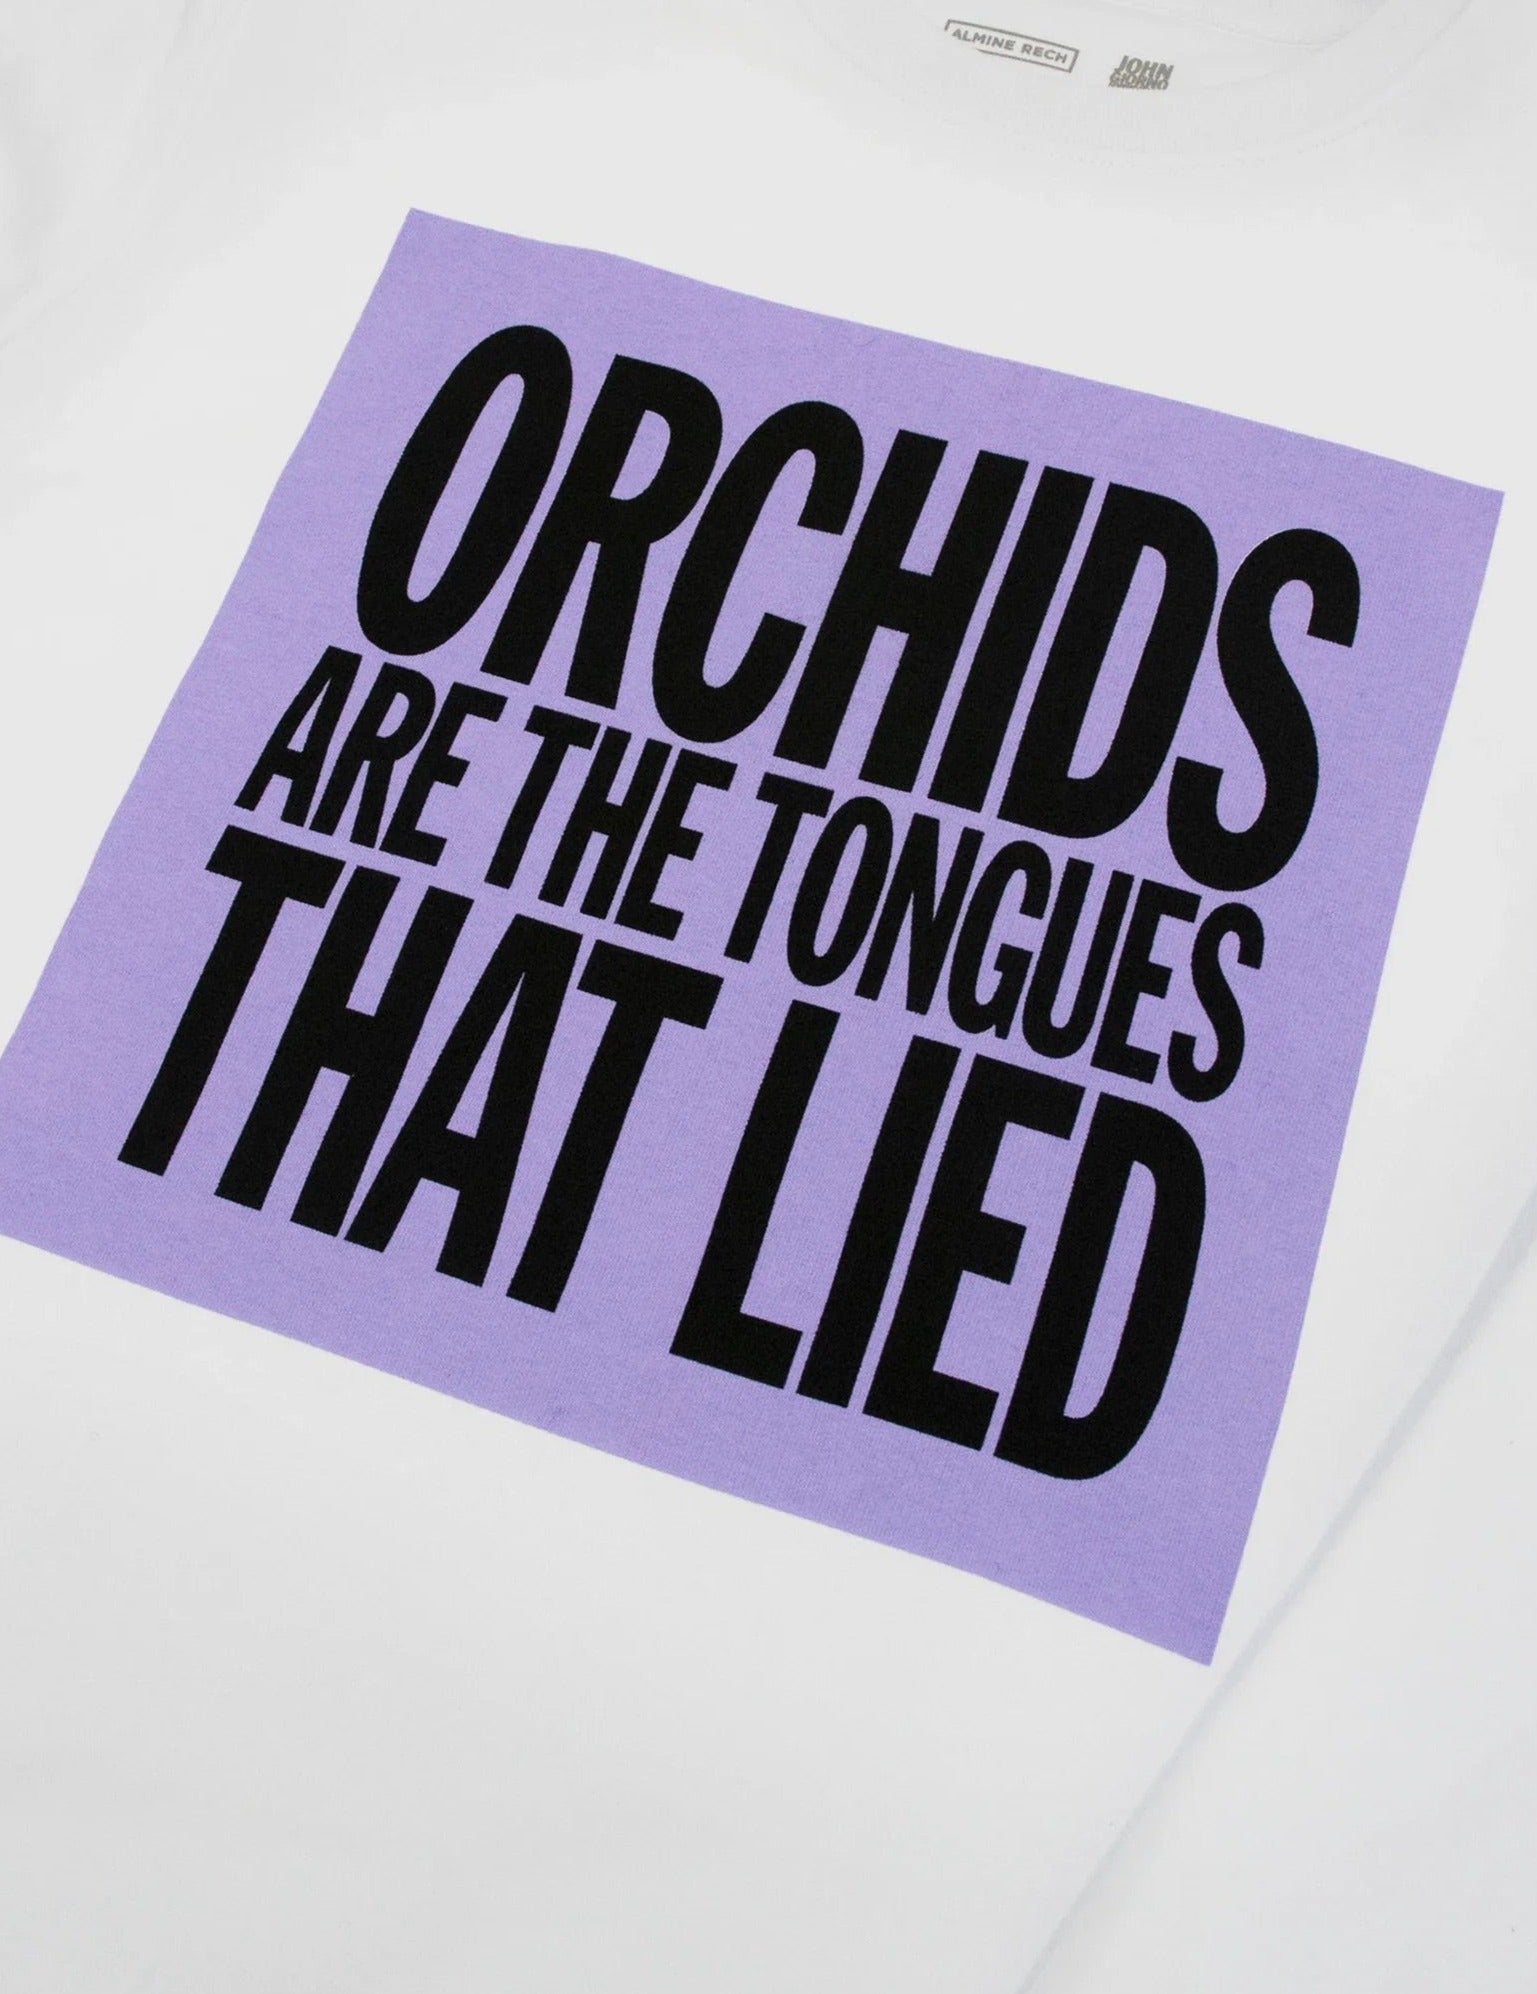 Orchids are the Tongues that Lied - Sweatshirt